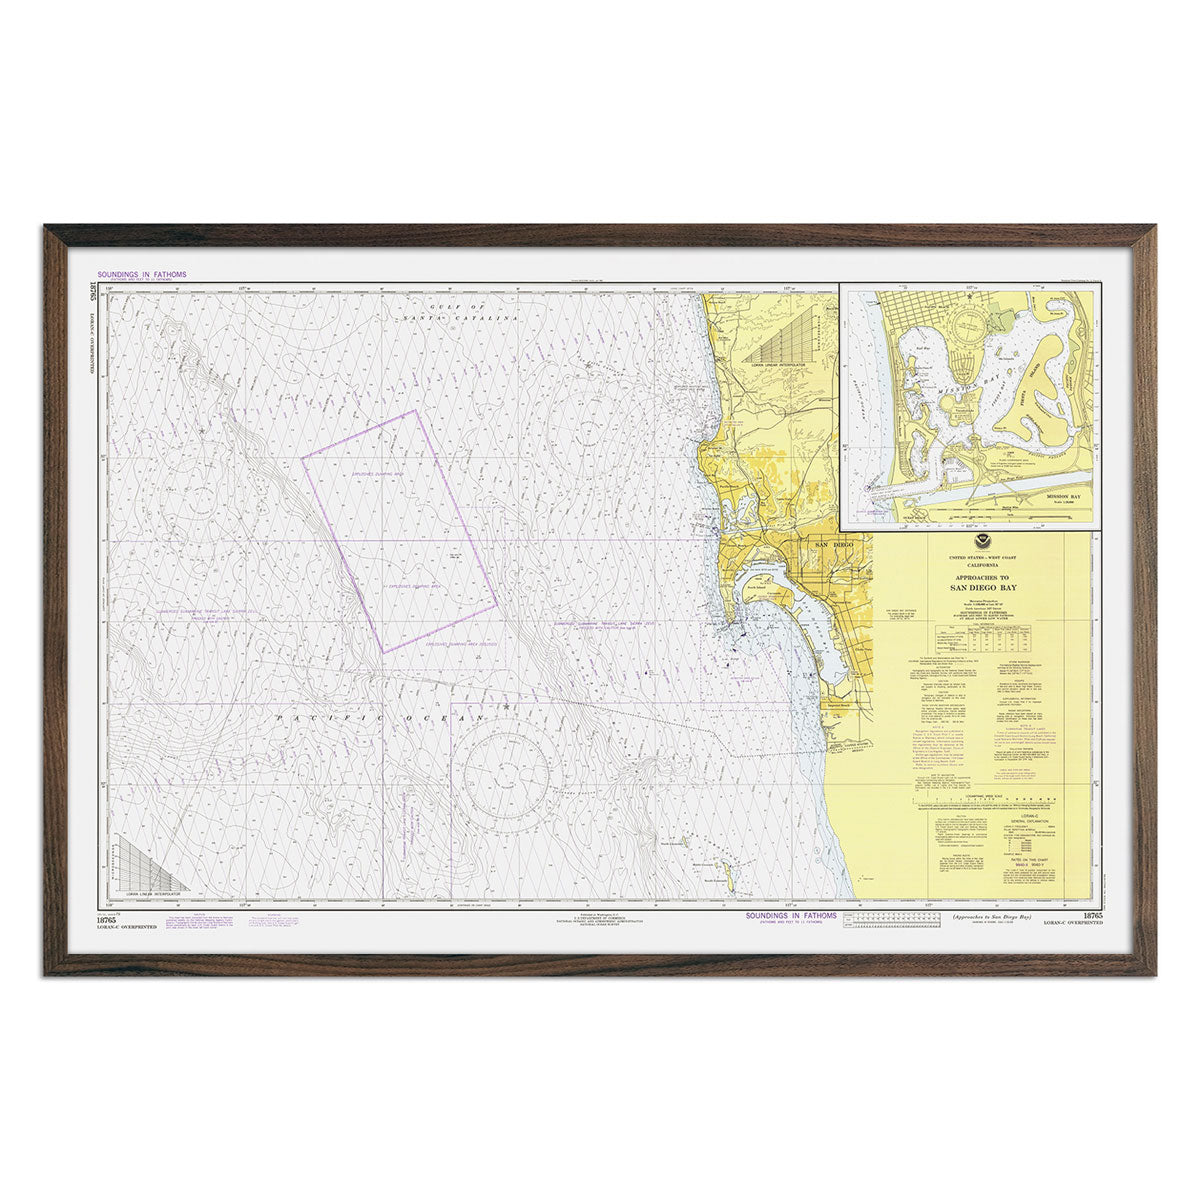 San Diego Bay Approaches Nautical Chart 1979